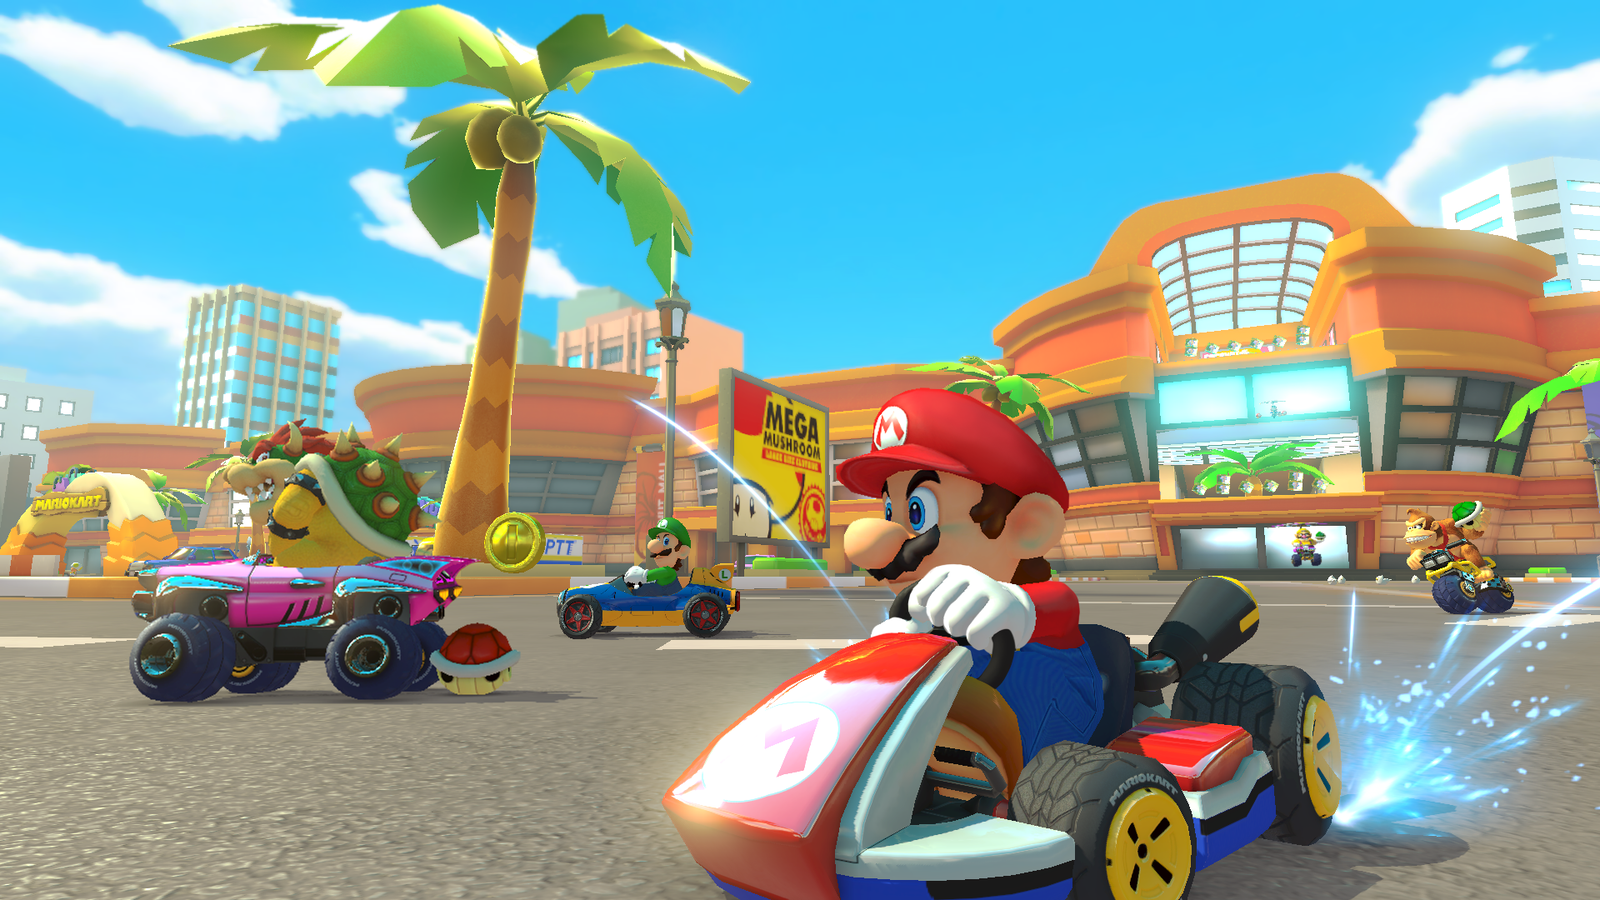 Mario Kart 8 Deluxe Booster Course Pass:' DLC, Pricing, Availability